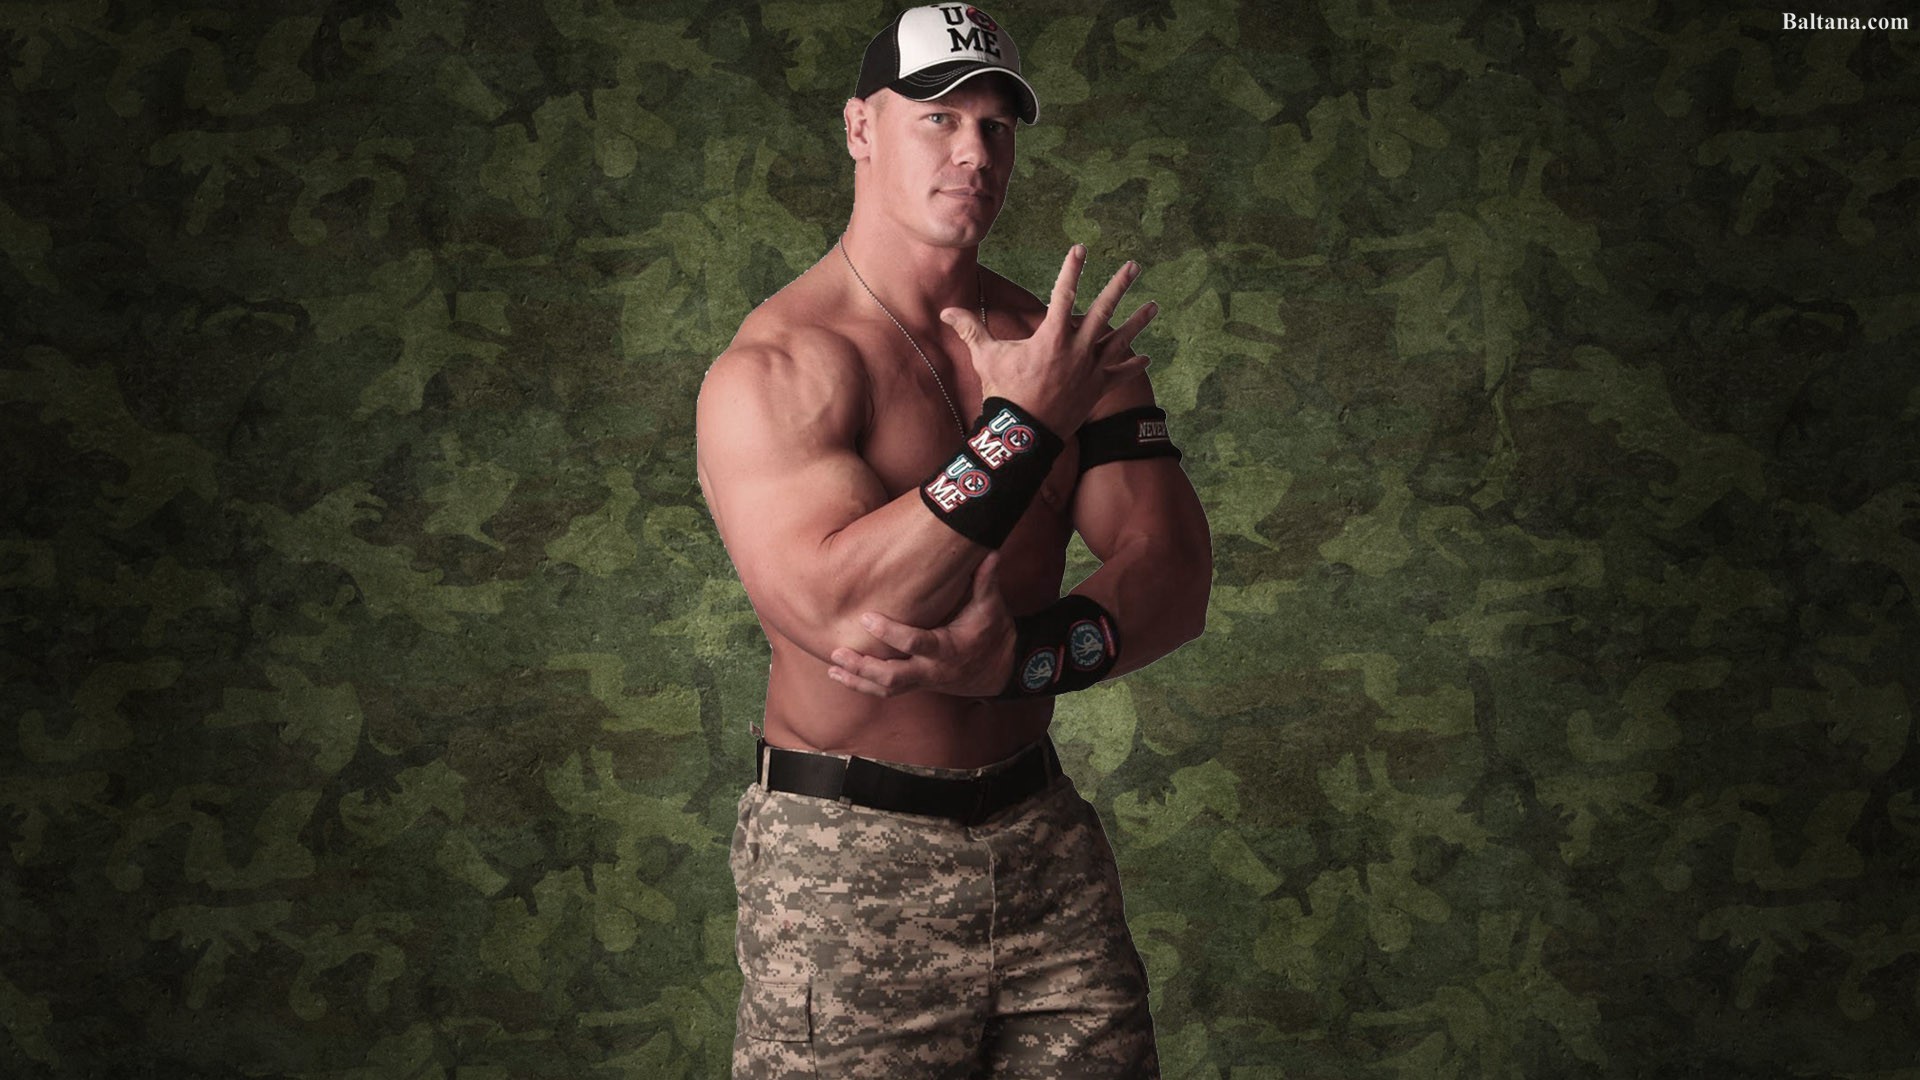 Download free John Cena HQ Desktop Wallpaper 29862 available in different h...